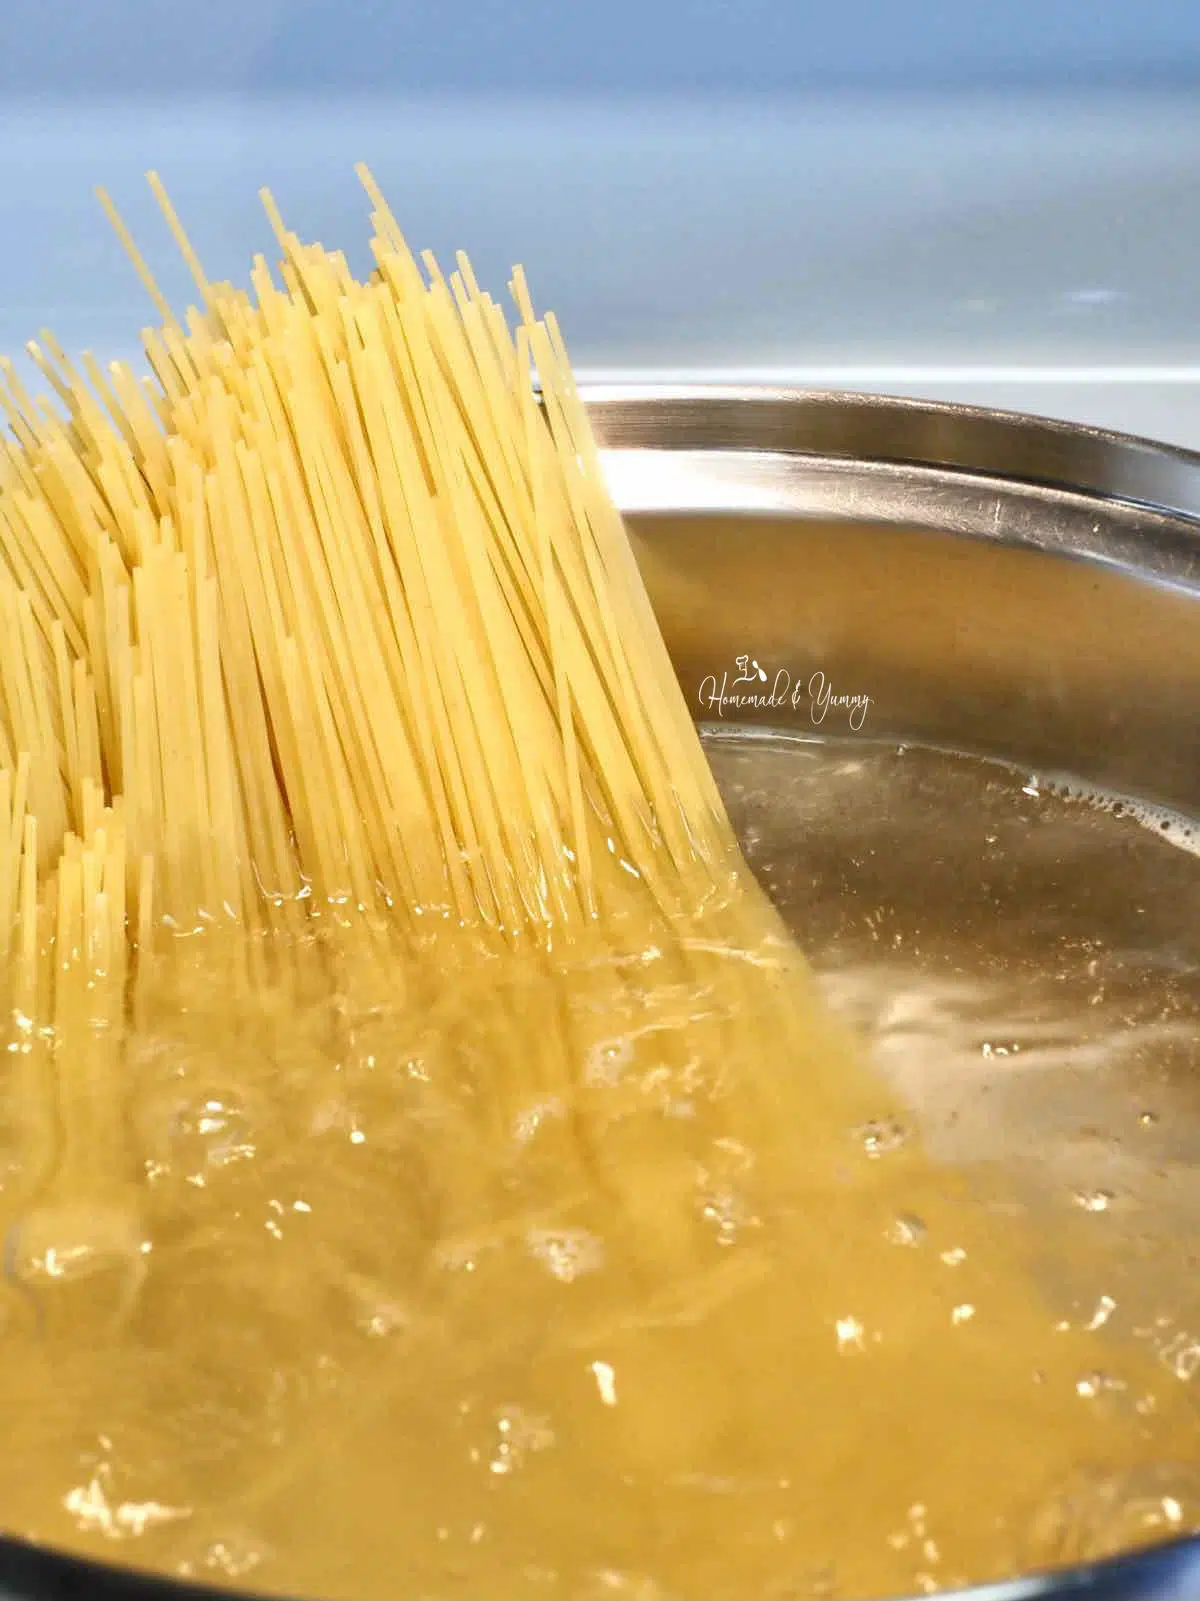 Spaghetti noodles boiling in a pot.